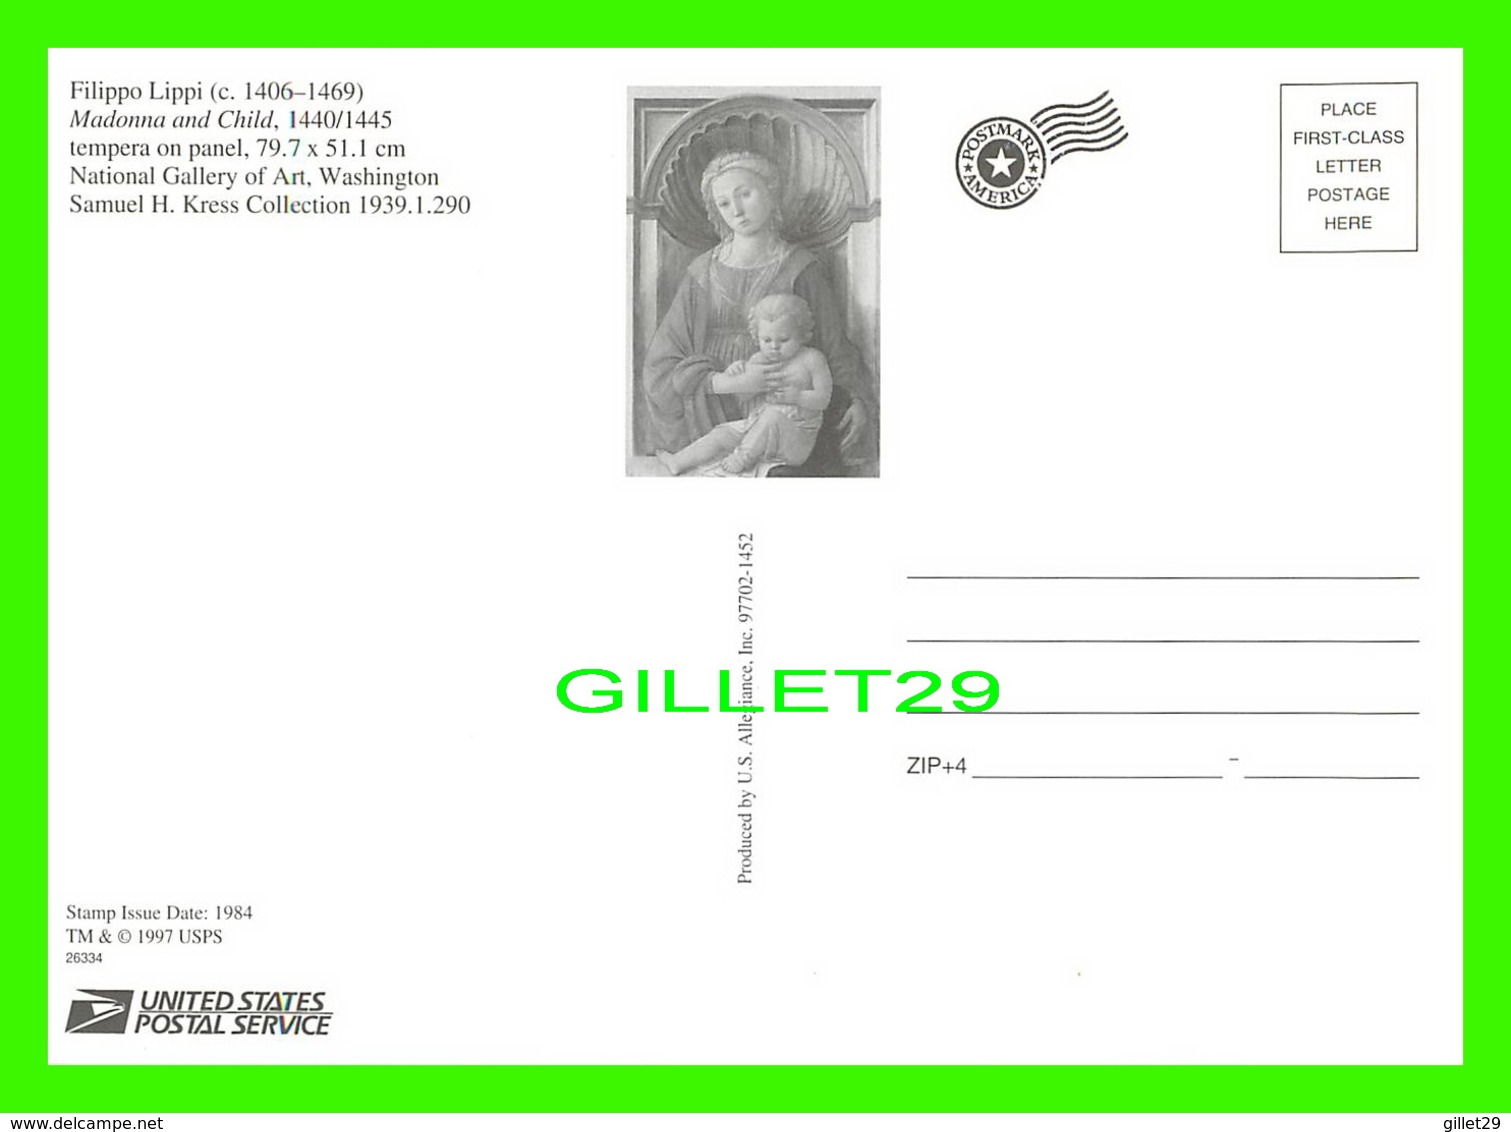 TIMBRES REPRÉSENTATIONS - CHRISTMAS - FILIPPO LIPPI (1406-1469) MADONNA AND CHILD - STAMP ISSUE, 1984 - - Timbres (représentations)